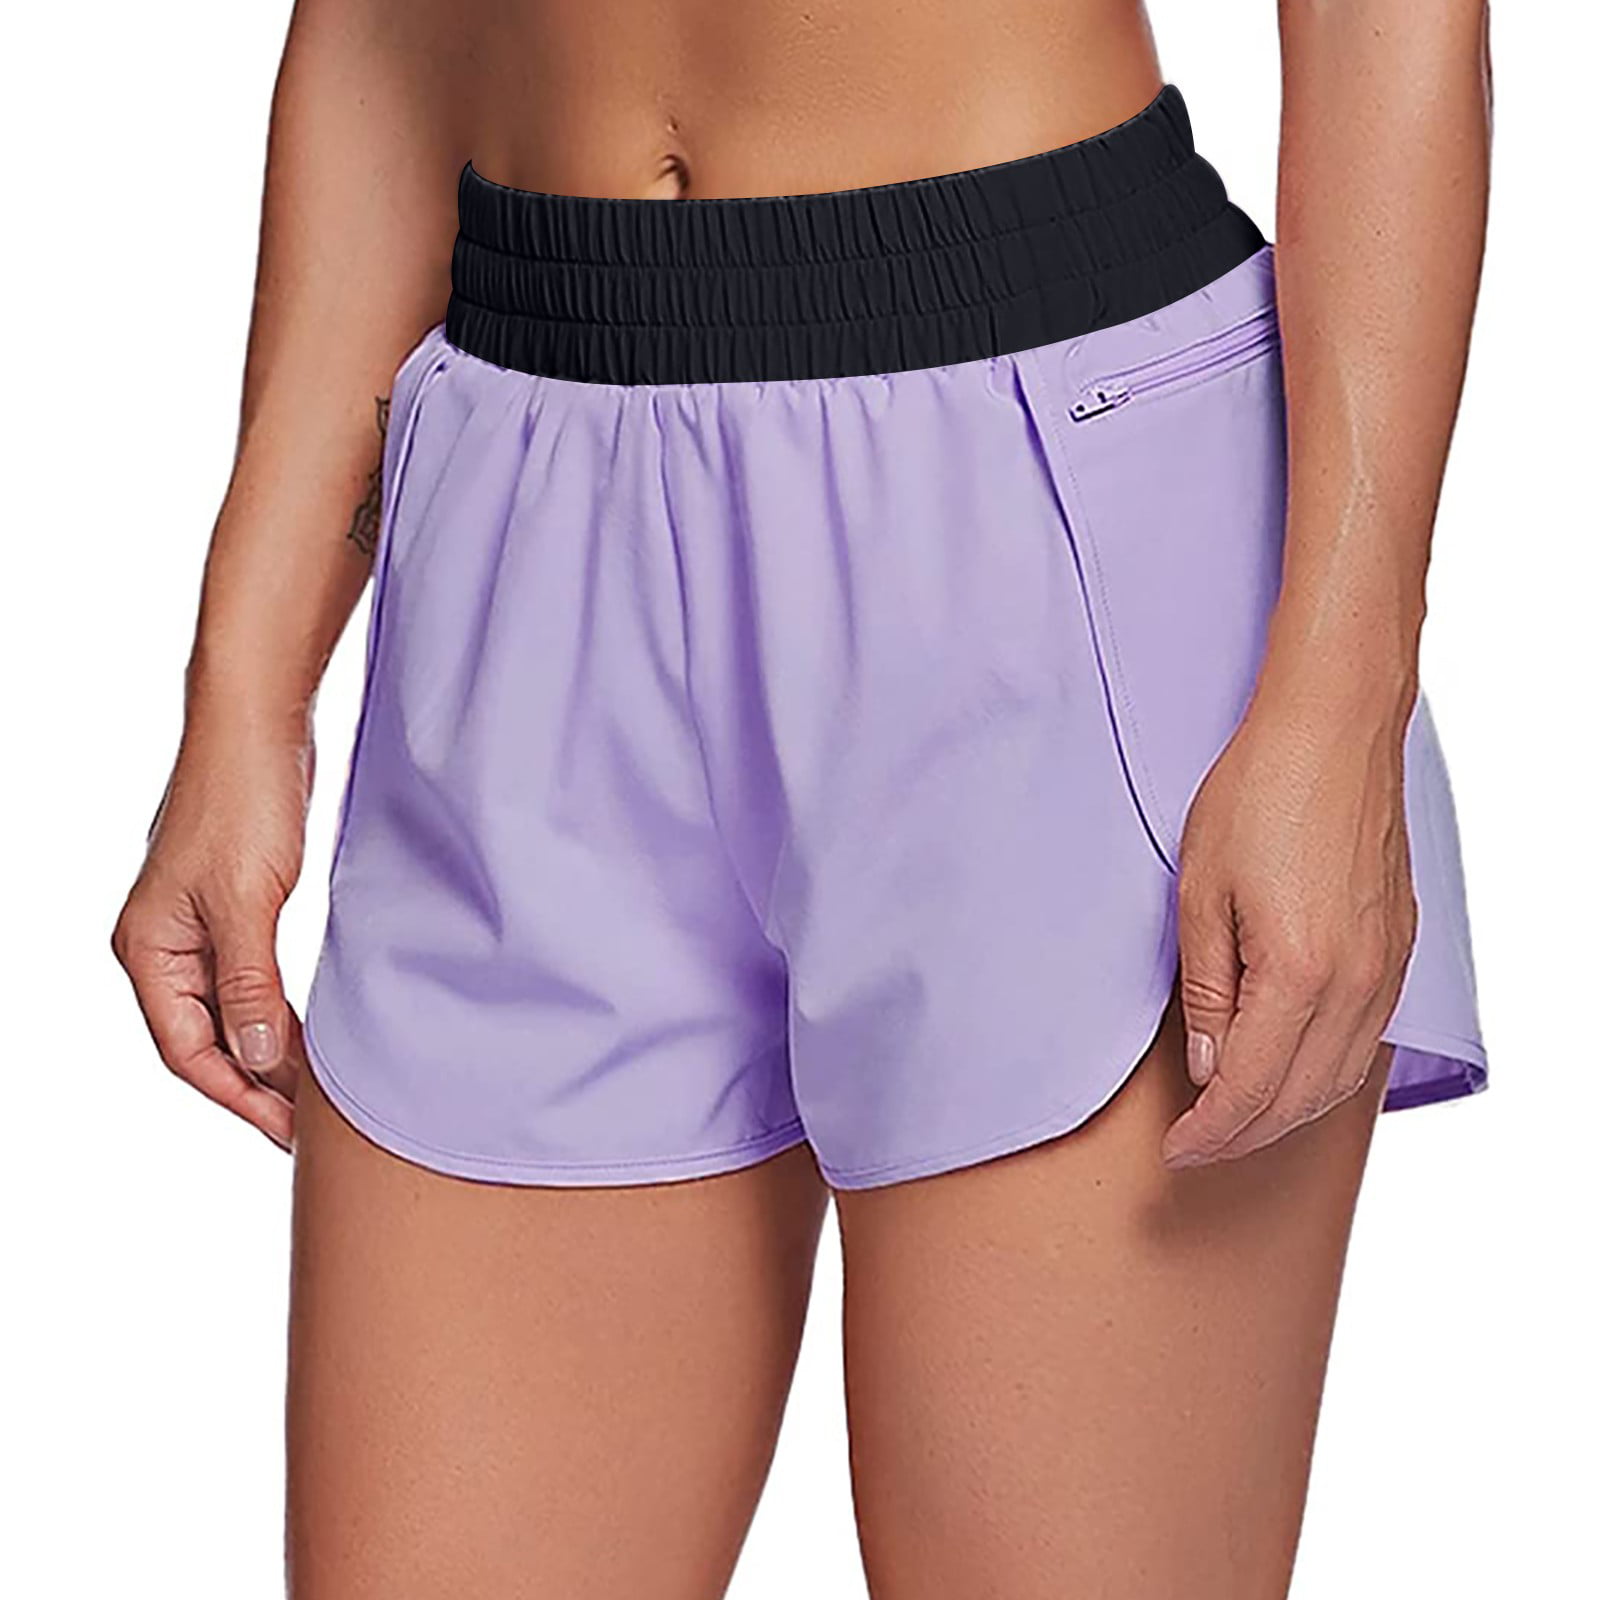 Womens Quick-Dry Running Shorts Sport Elastic Active Workout Shorts with Pocket